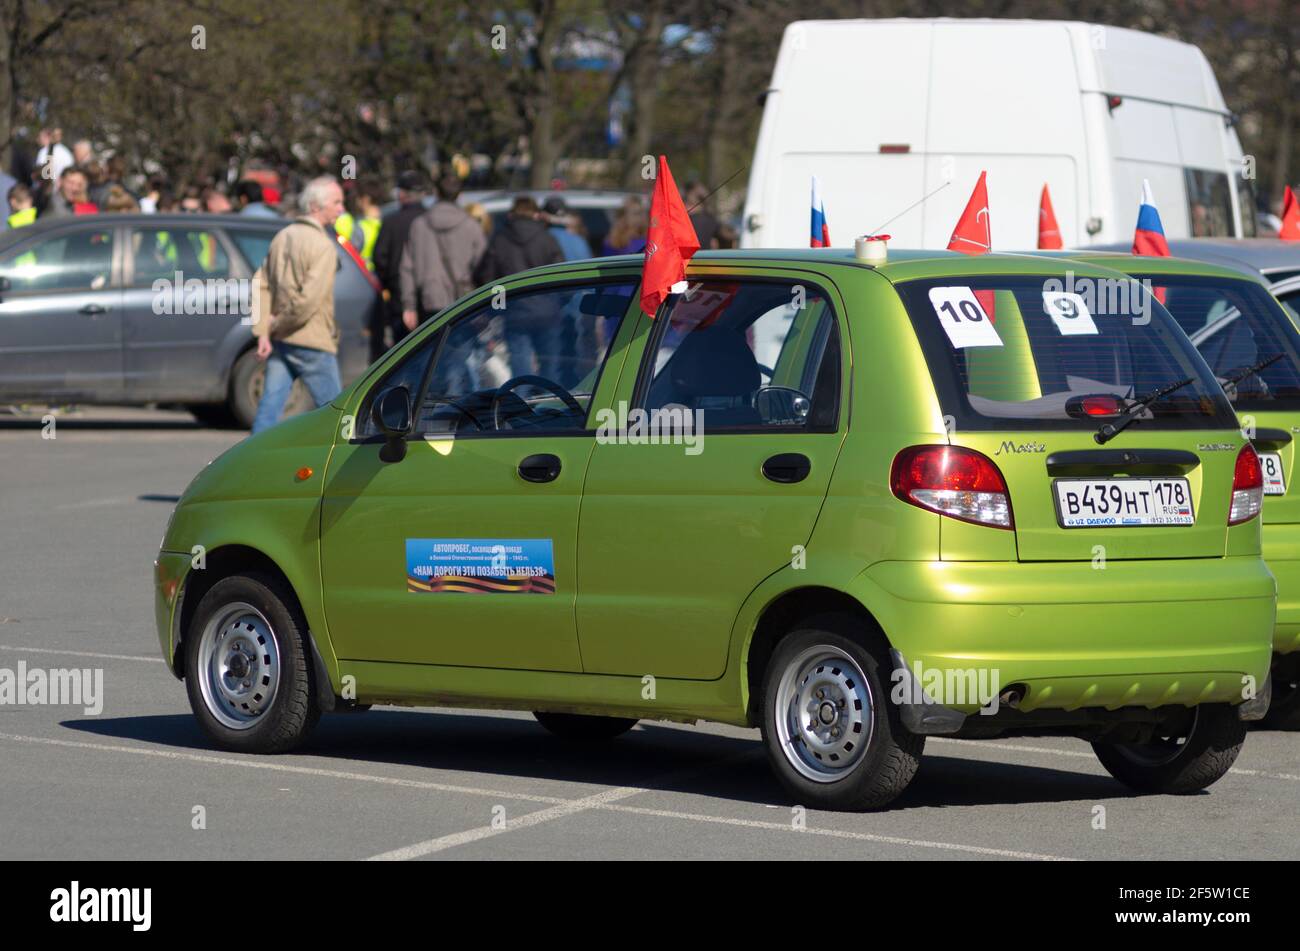 Saint Petersburg, Russia - May 05, 2016: Annual rally on flag-decorated small cars Daewoo Matiz in memory of the Great Patriotic War 1941-1945 Stock Photo